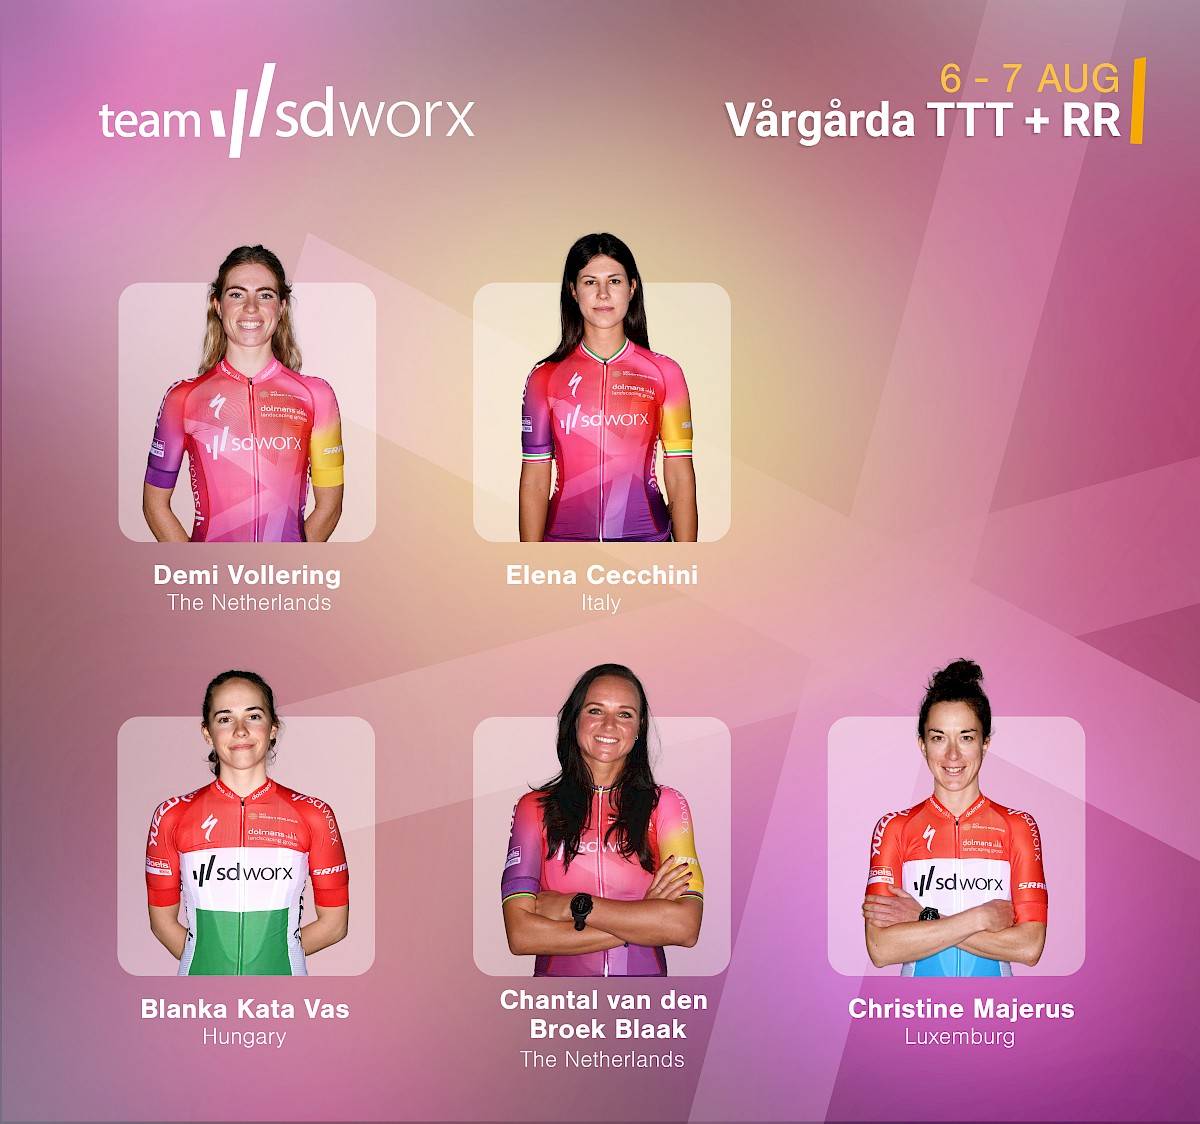 Team SD Worx wants to continue the Tour de France Femmes trend in Sweden